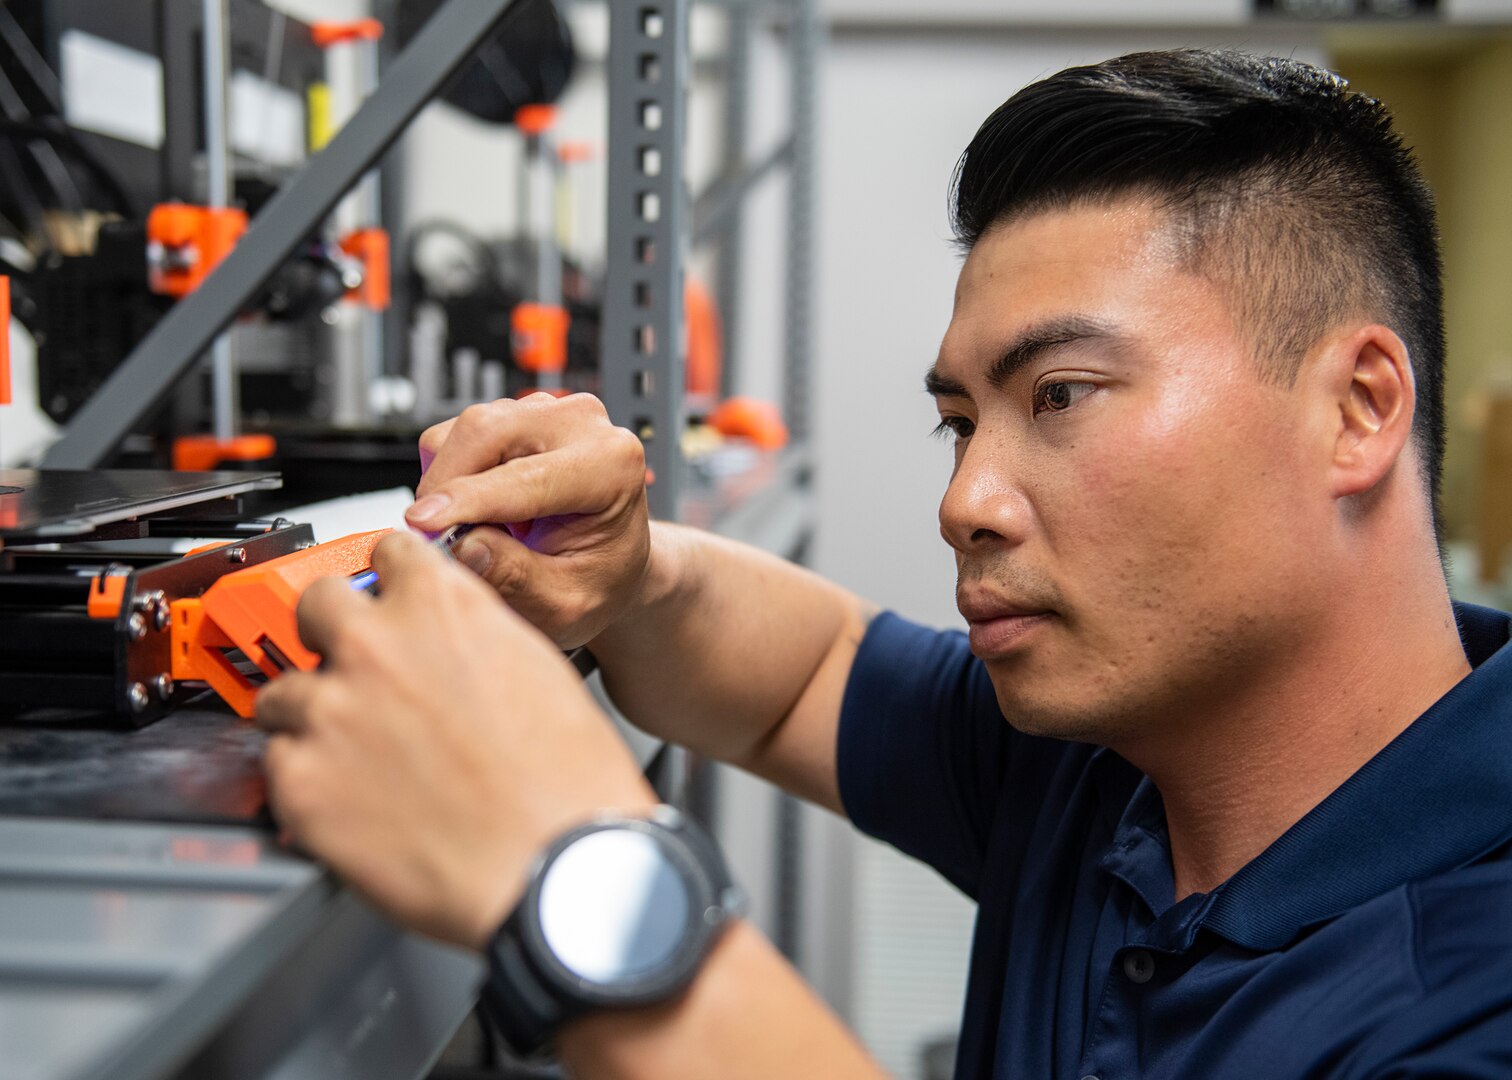 Naval Surface Warfare Center Panama City Division employee Bryan Tien Le uses a three dimensional printer to fabricate a part for one of the diver assisting units he works on. U.S. Navy photo by Eddie Green